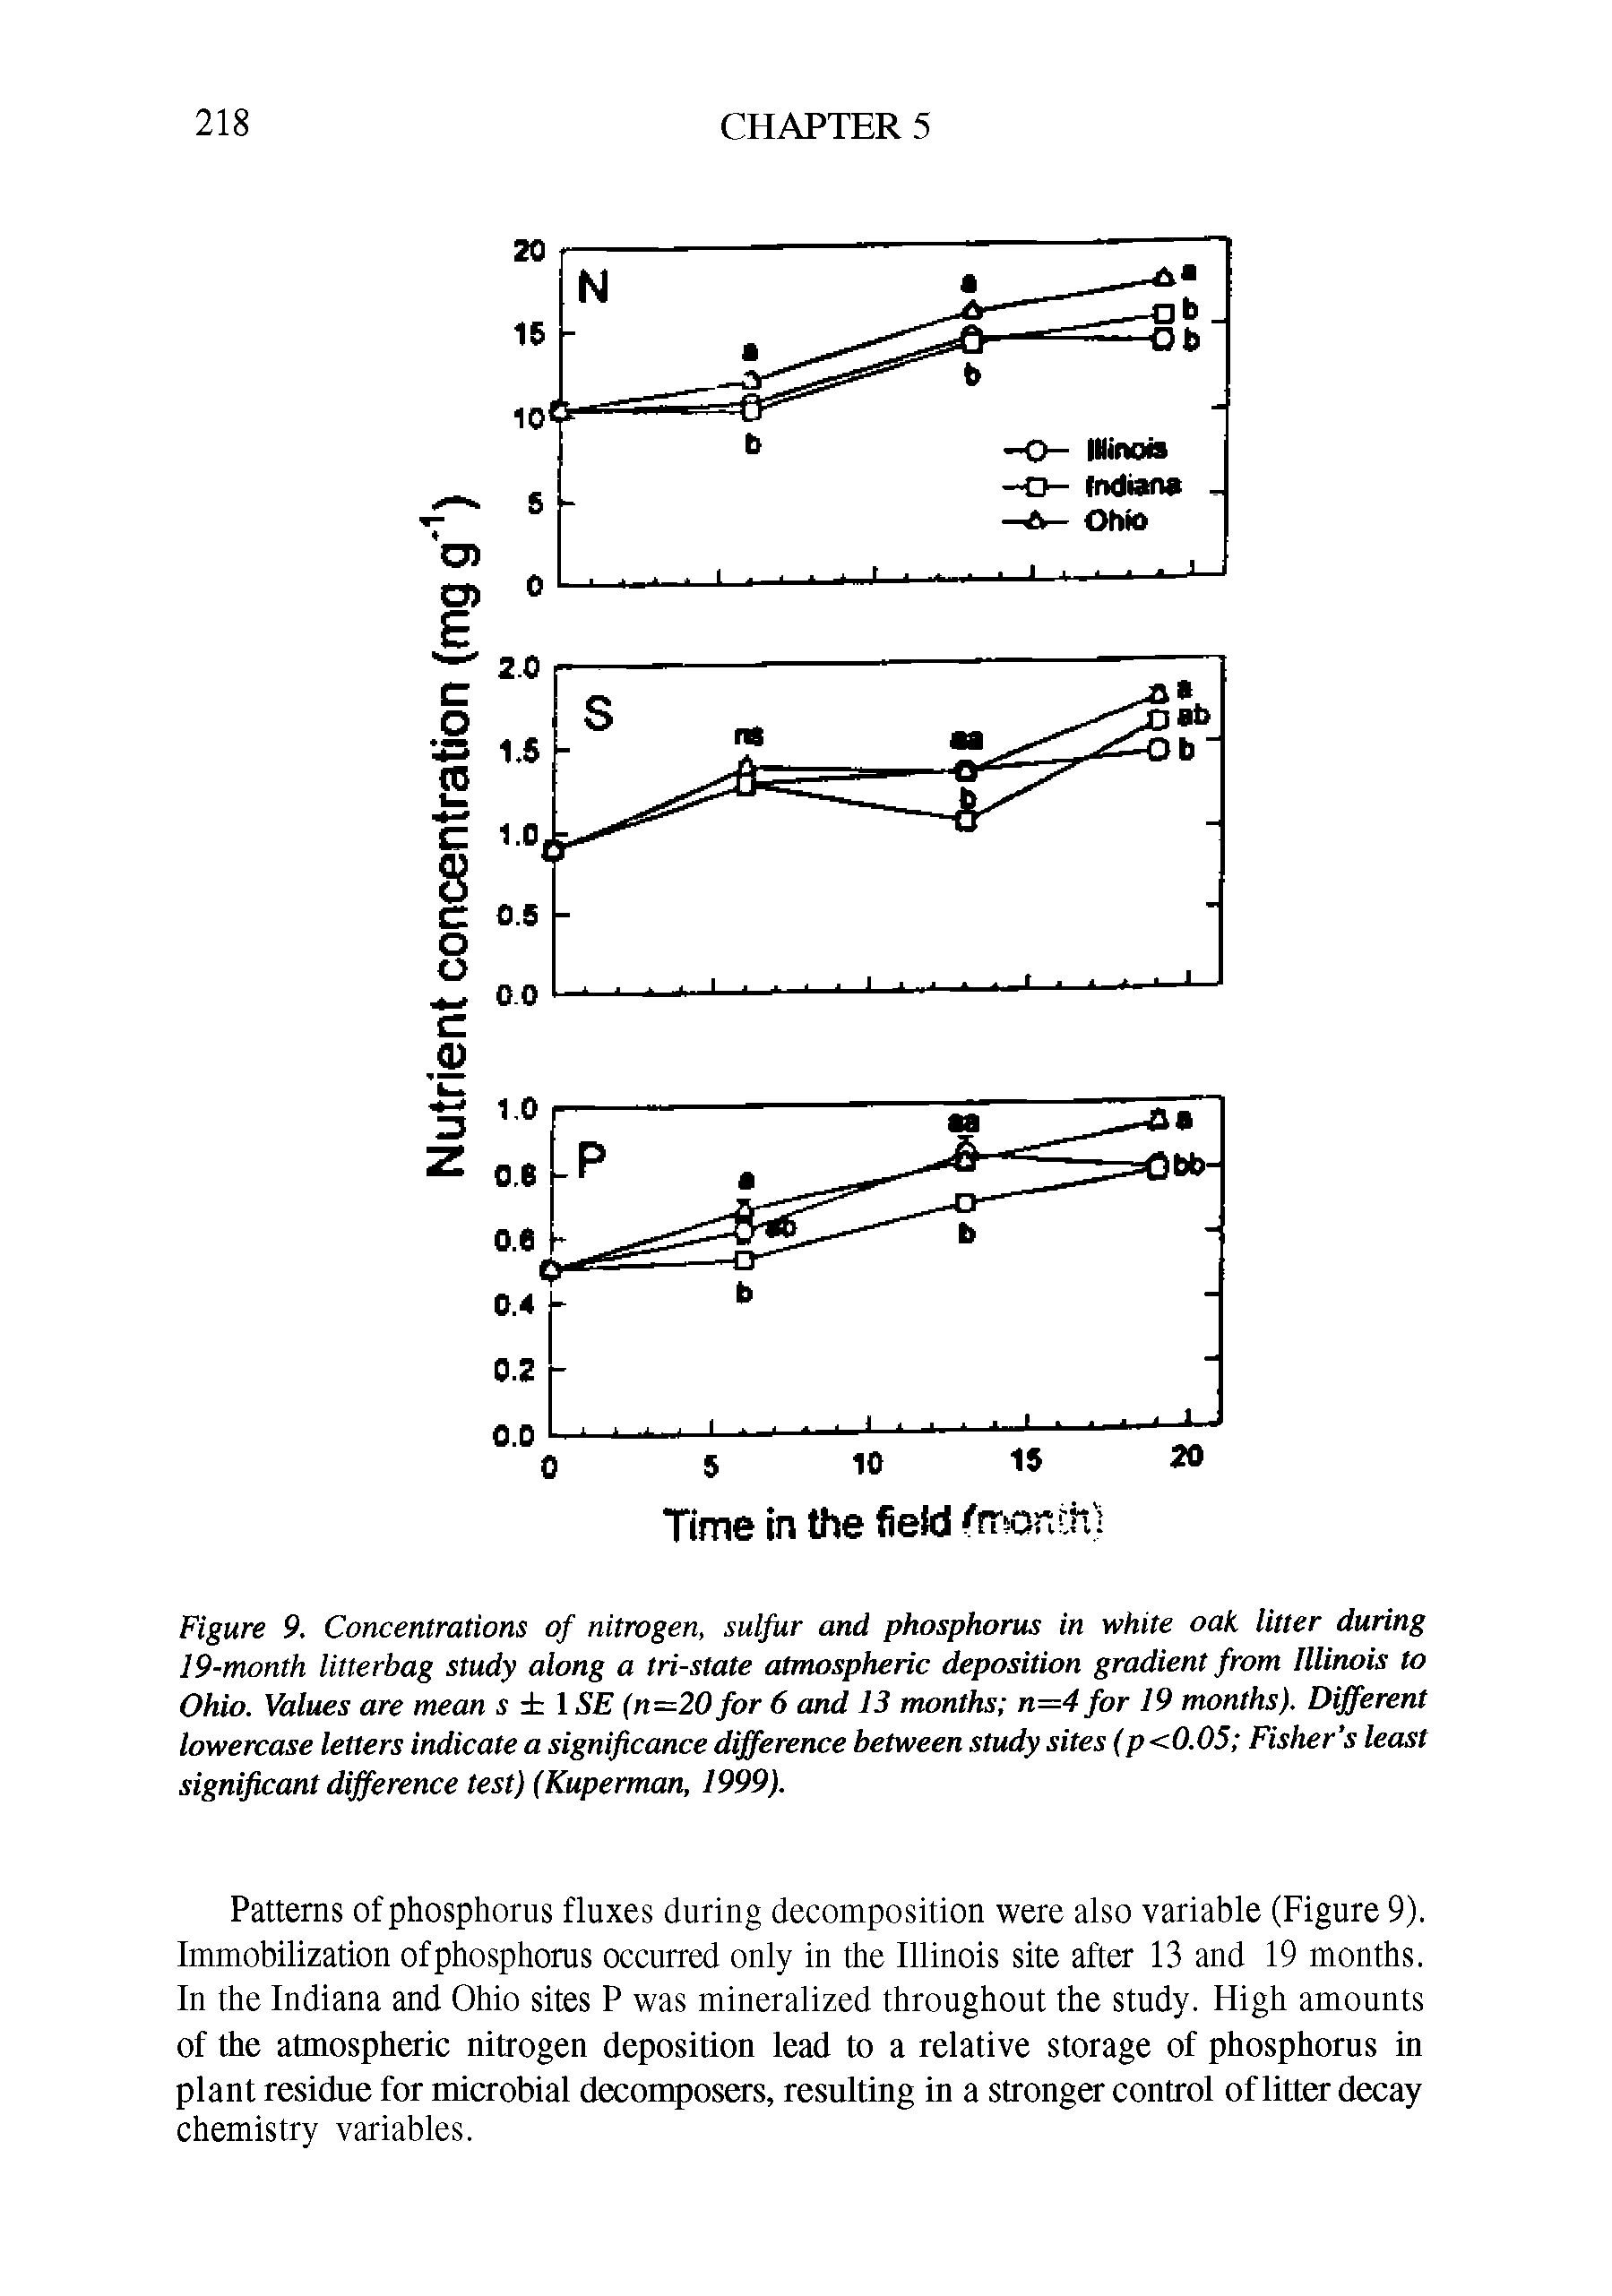 Figure 9. Concentrations of nitrogen, sulfur and phosphorus in white oak litter during 19-month litterbag study along a tri-state atmospheric deposition gradient from Illinois to Ohio. Values are mean s diXSE (n=20 for 6 and 13 months n=4 for 19 months). Different lowercase letters indicate a significance difference between study sites (p <0.05 Fisher s least significant difference test) (Kuperman, 1999).